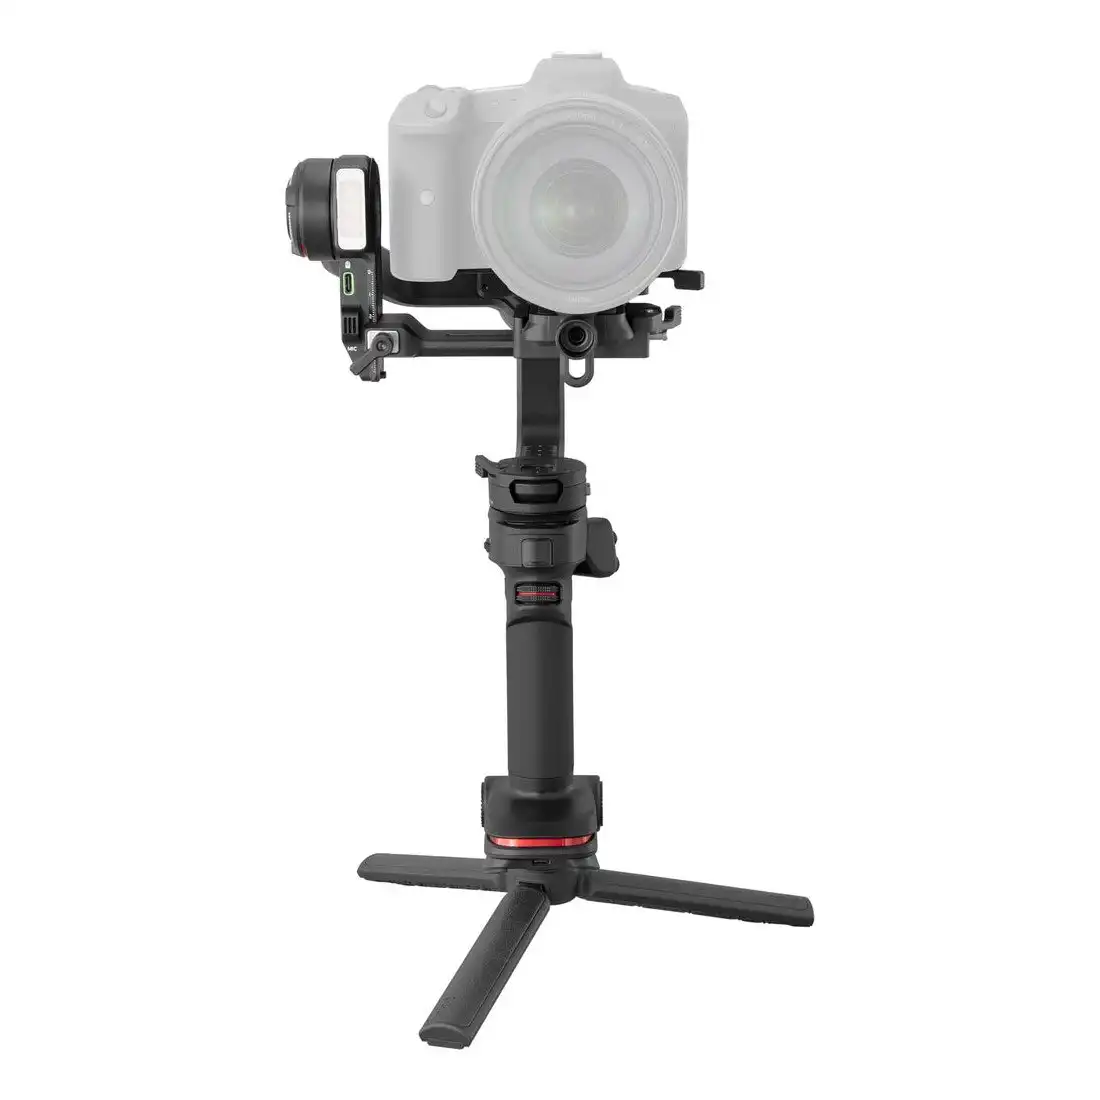 Zhiyun Weebill 3 Handheld Gimbal Stabilizer (w Built-In Microphone and Fill Light)